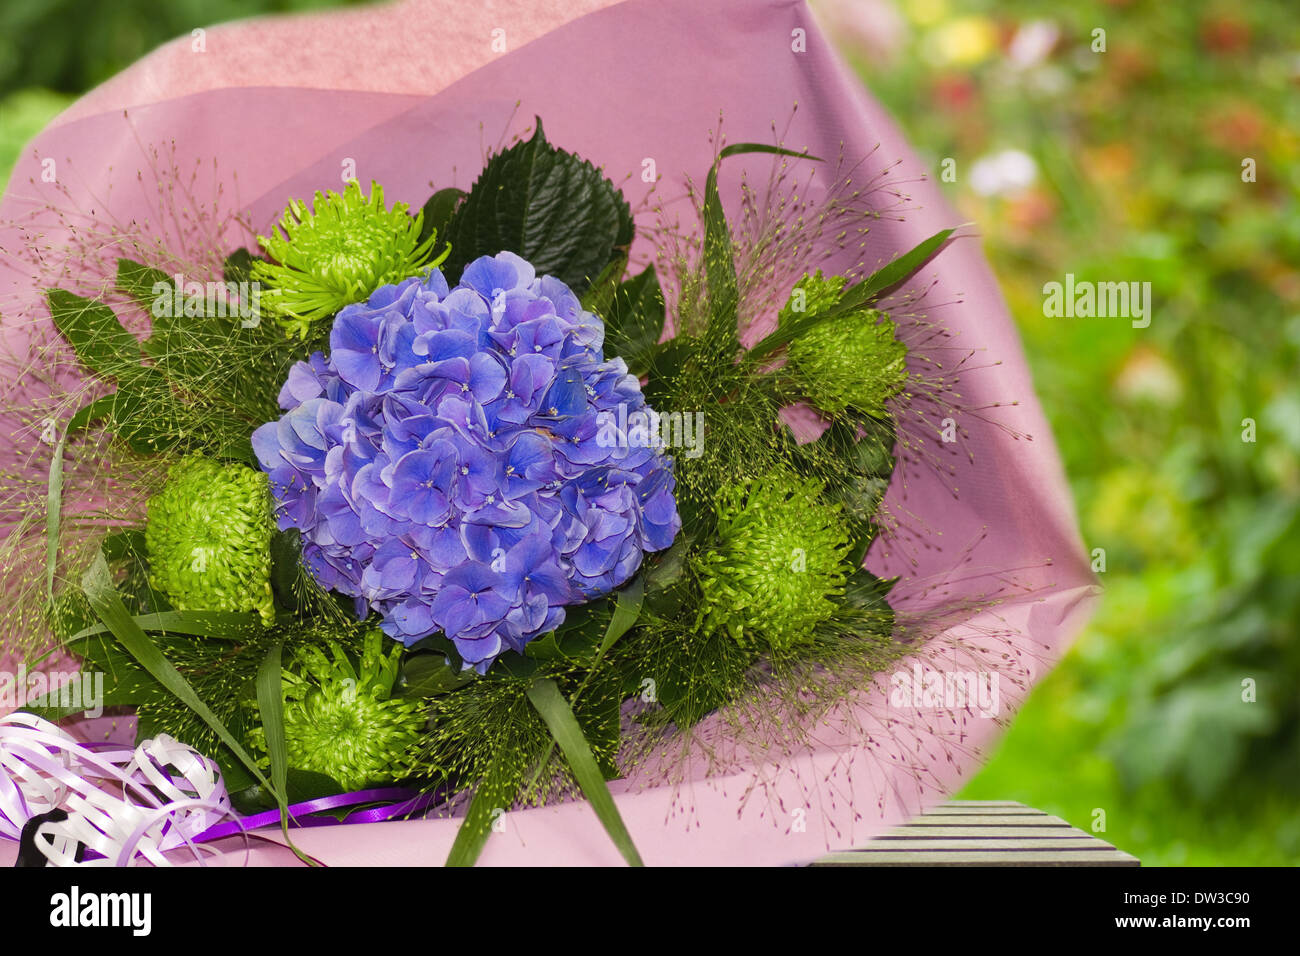 Mixed blue and green bouquet of summer flowers wrapped in pink paper with summer garden background Stock Photo